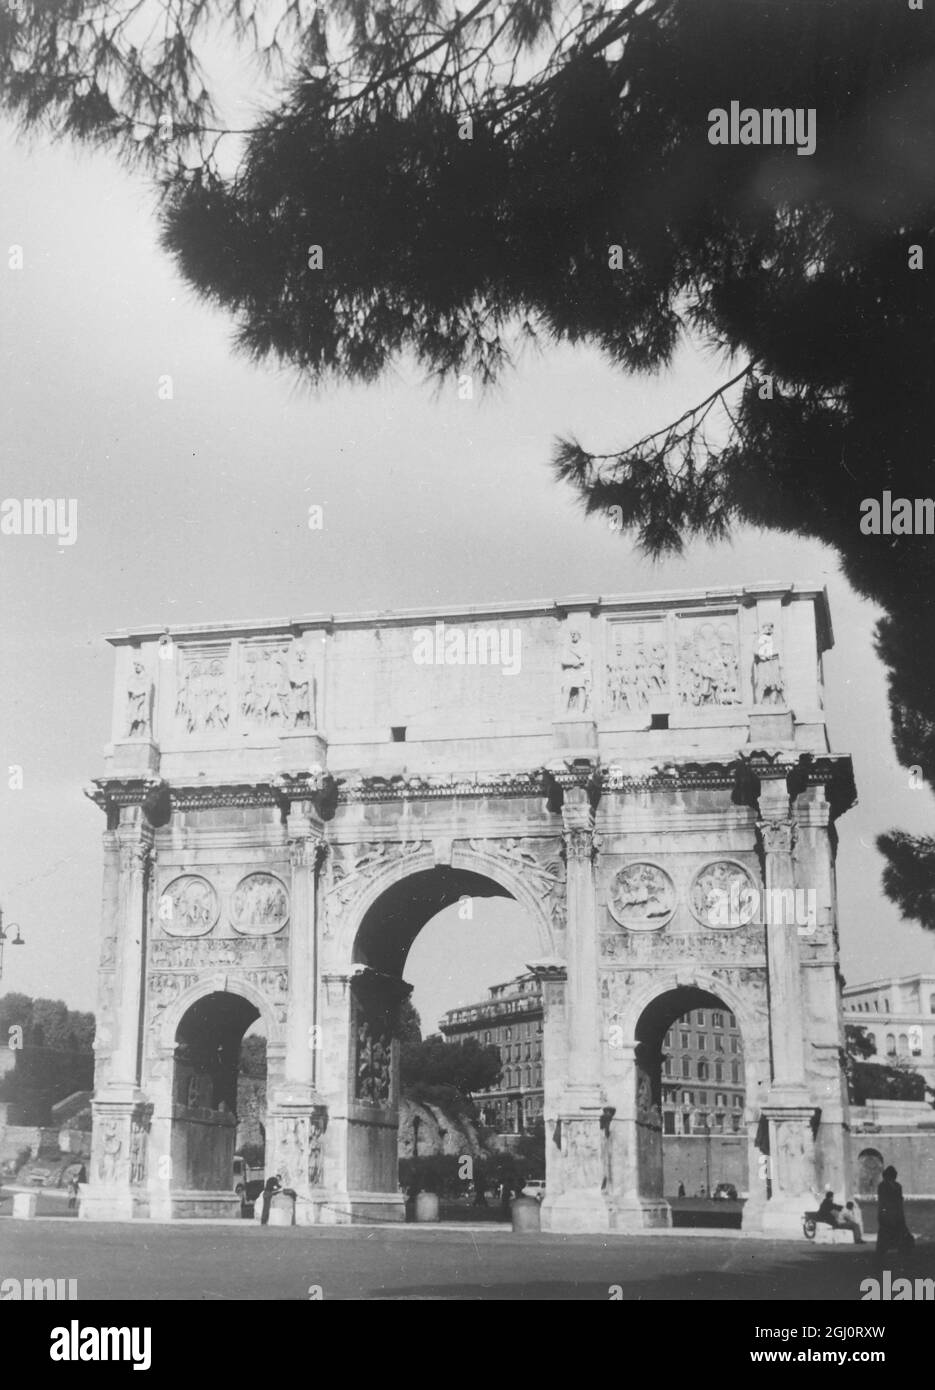 THE ARCH BUILT FOR THE TRIUMPH OF ROMAN EMPEROR CONSTANTINE WILL BE USED FOR THE MARATHON RACE DURING THE 1960 ROME OLYMPICS 4 JANUARY 1960 Stock Photo